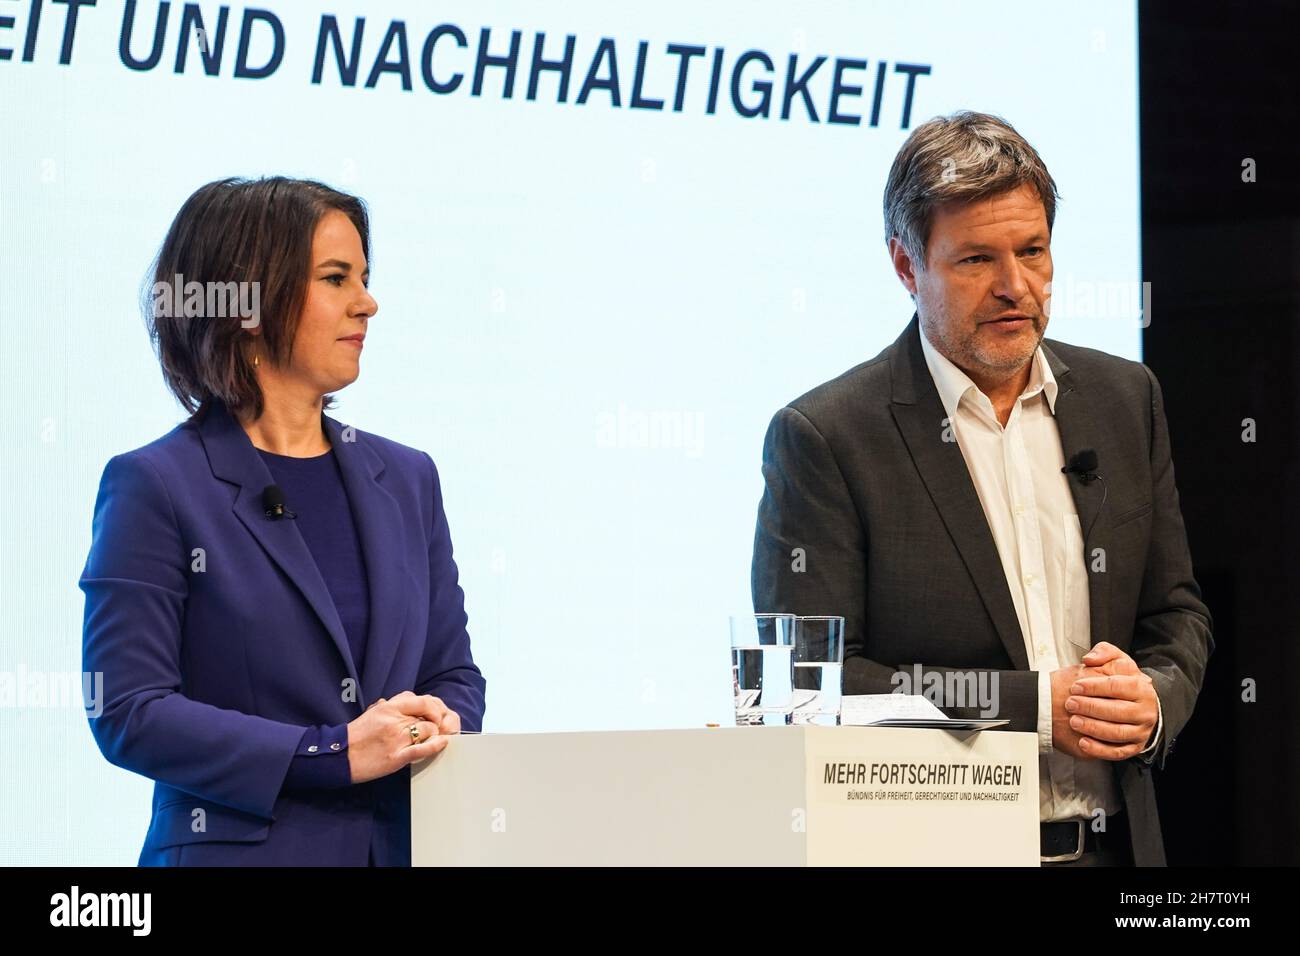 Berlin, Germany. 24th Nov, 2021. Leaders of Germany's The Greens Robert Habeck (R) and Annalena Baerbock attend a joint press conference in Berlin, Germany, on Nov. 24, 2021. Coalition negotiations among Germany's Social Democratic Party (SPD), the Greens and the Free Democratic Party (FDP) ended as the three parties presented an agreement on Wednesday. Credit: Stefan Zeitz/Xinhua/Alamy Live News Stock Photo